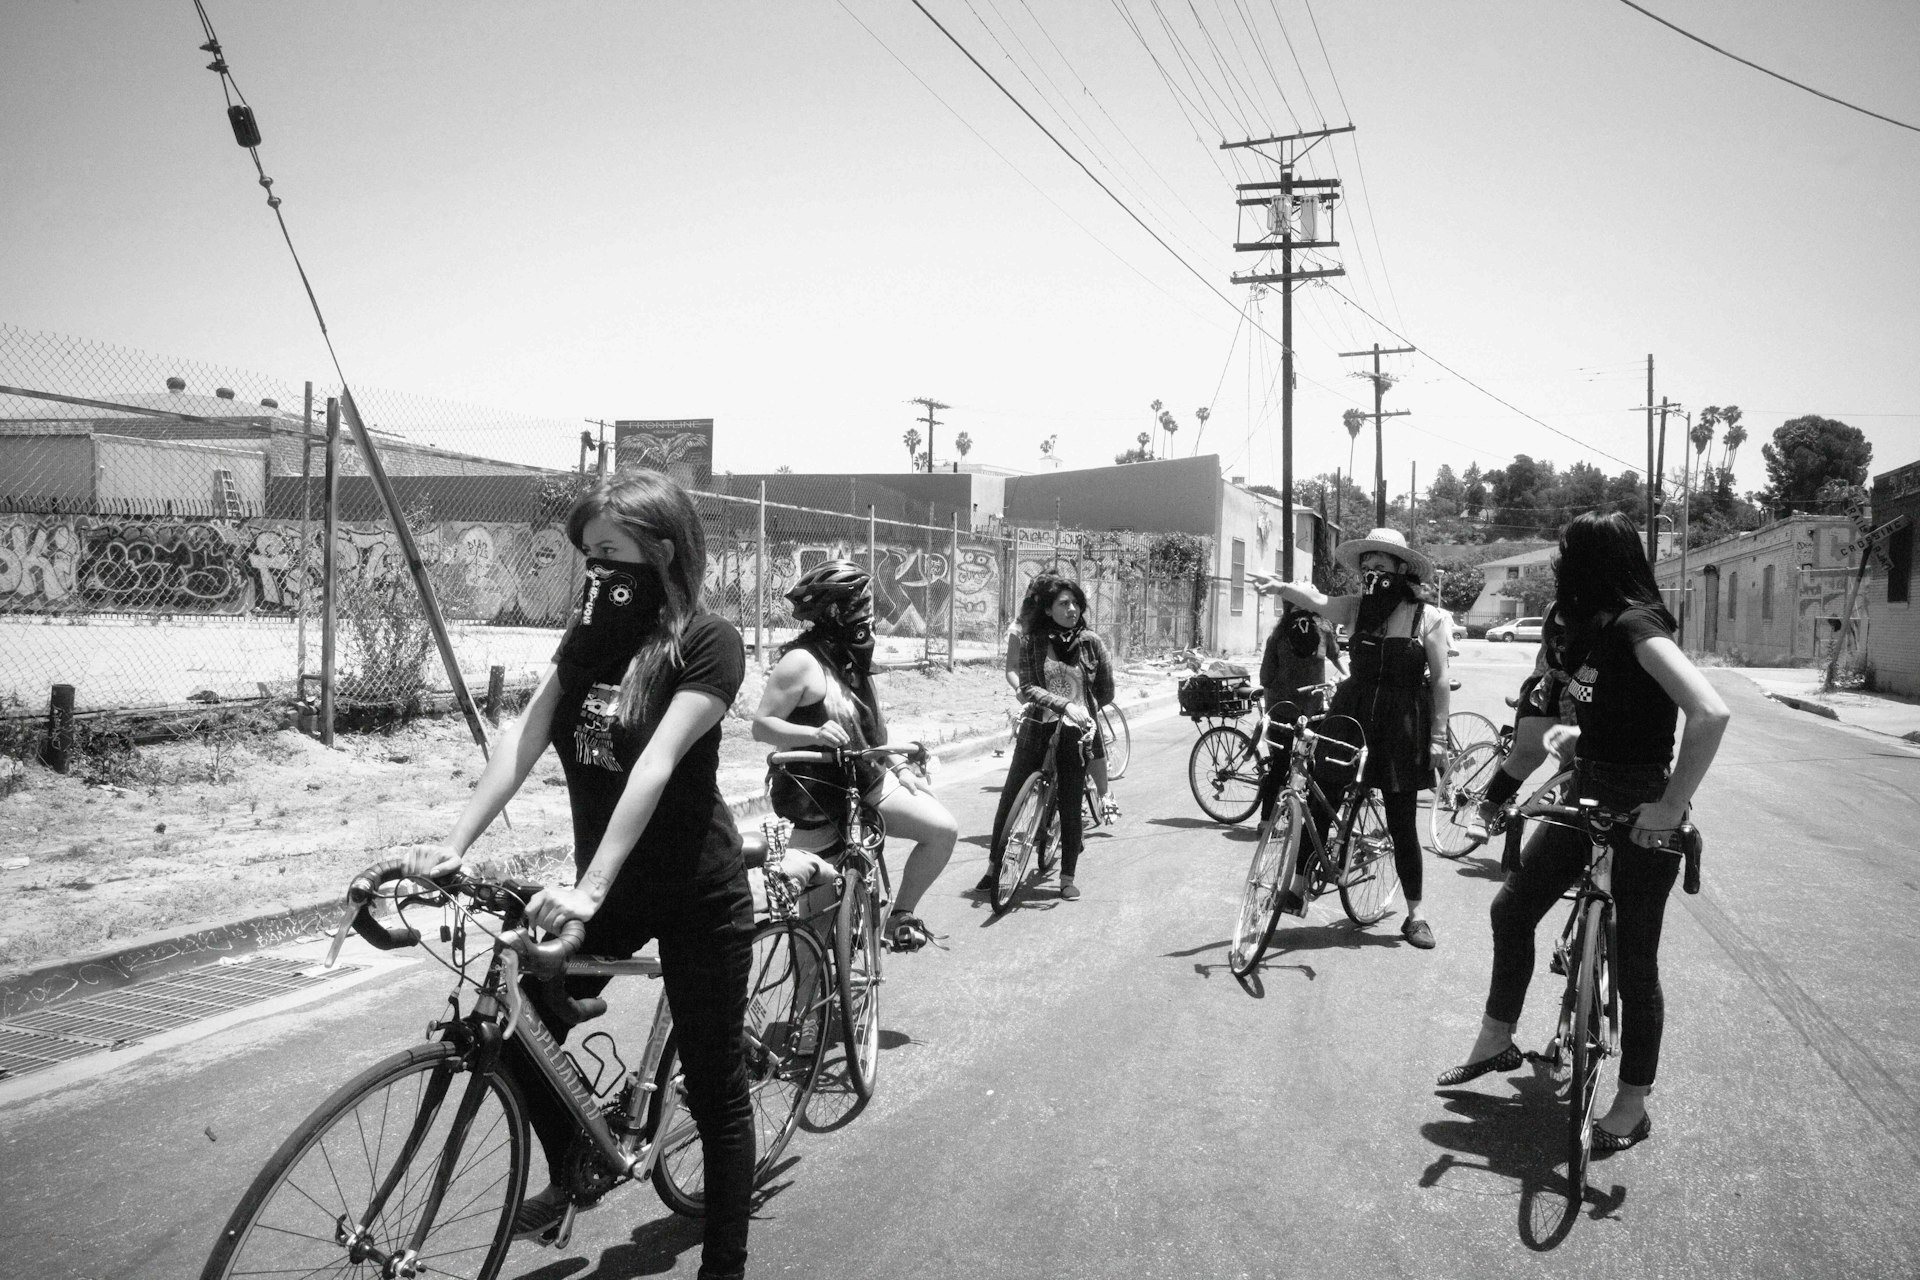 The all-female bike crew reclaiming the streets of East LA